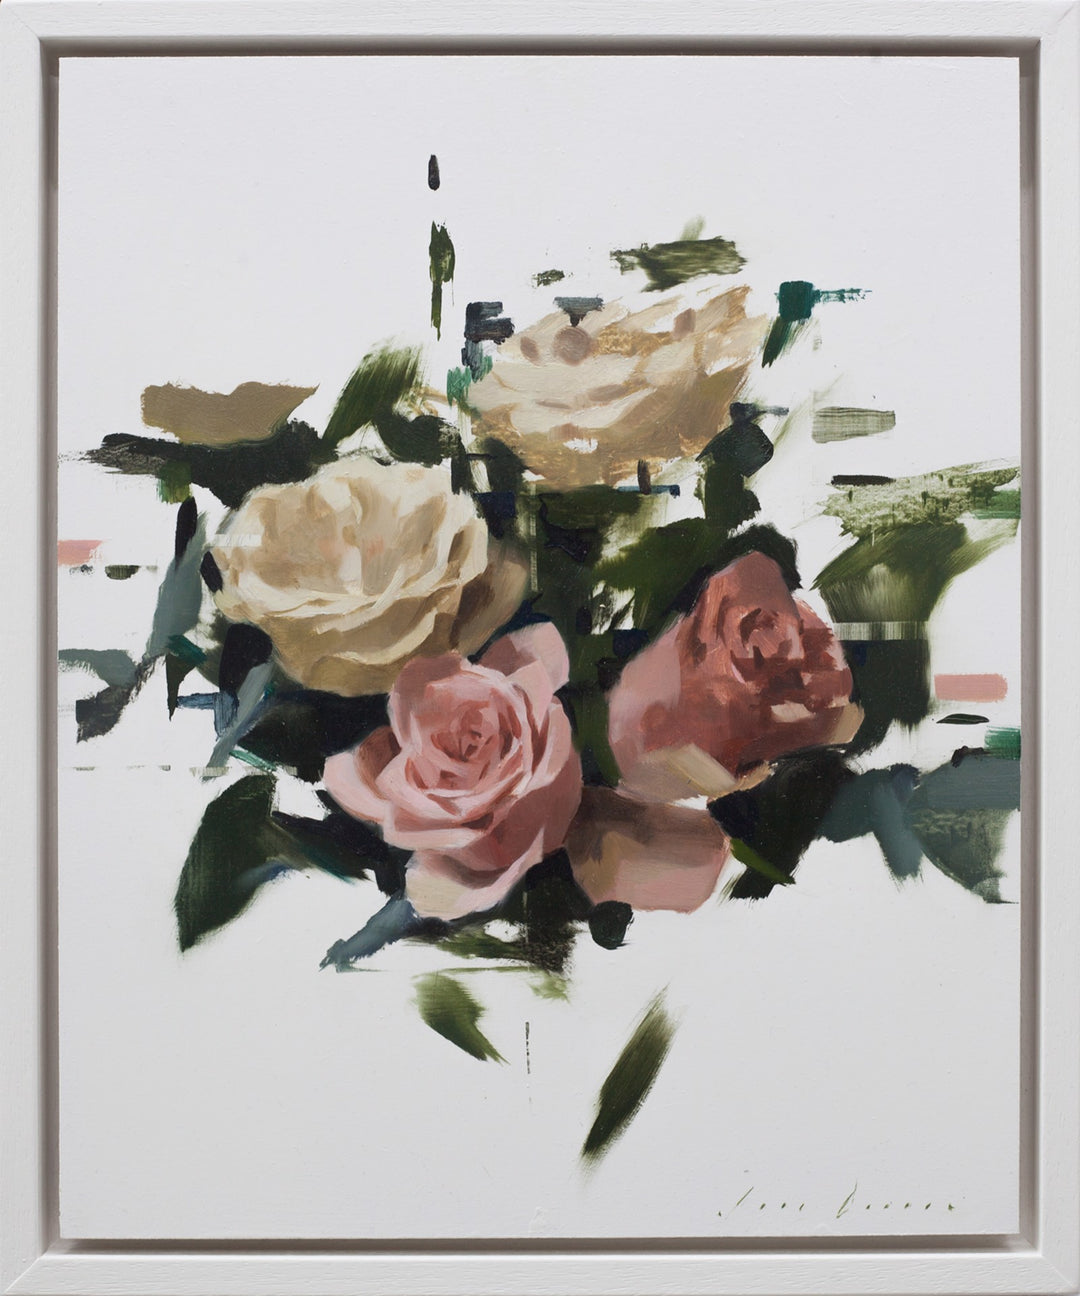 A painting of roses in a white frame, titled "Jon Doran - Recomposed No. 1", created by Jon Doran using oil on panel.